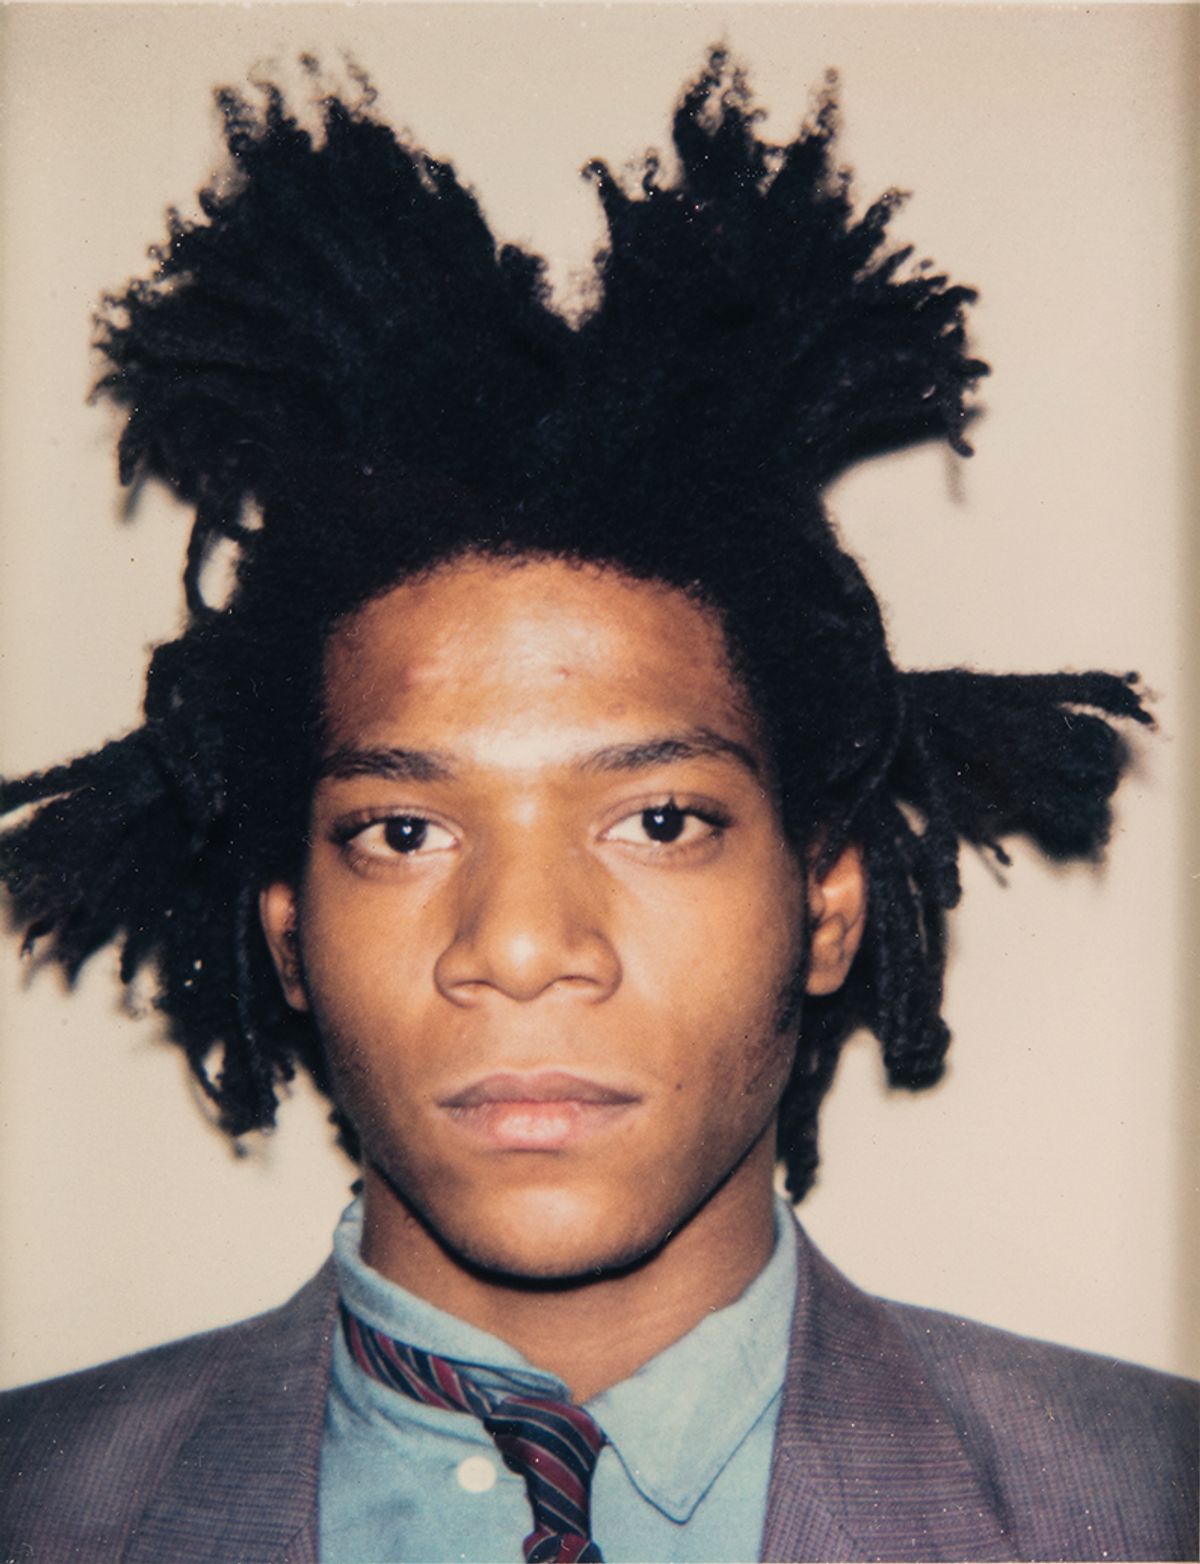 Jean-Michel Basquiat (1982) by Andy Warhol © The Andy Warhol Foundation for the Visual Arts, Inc. Licensed by ADAGP